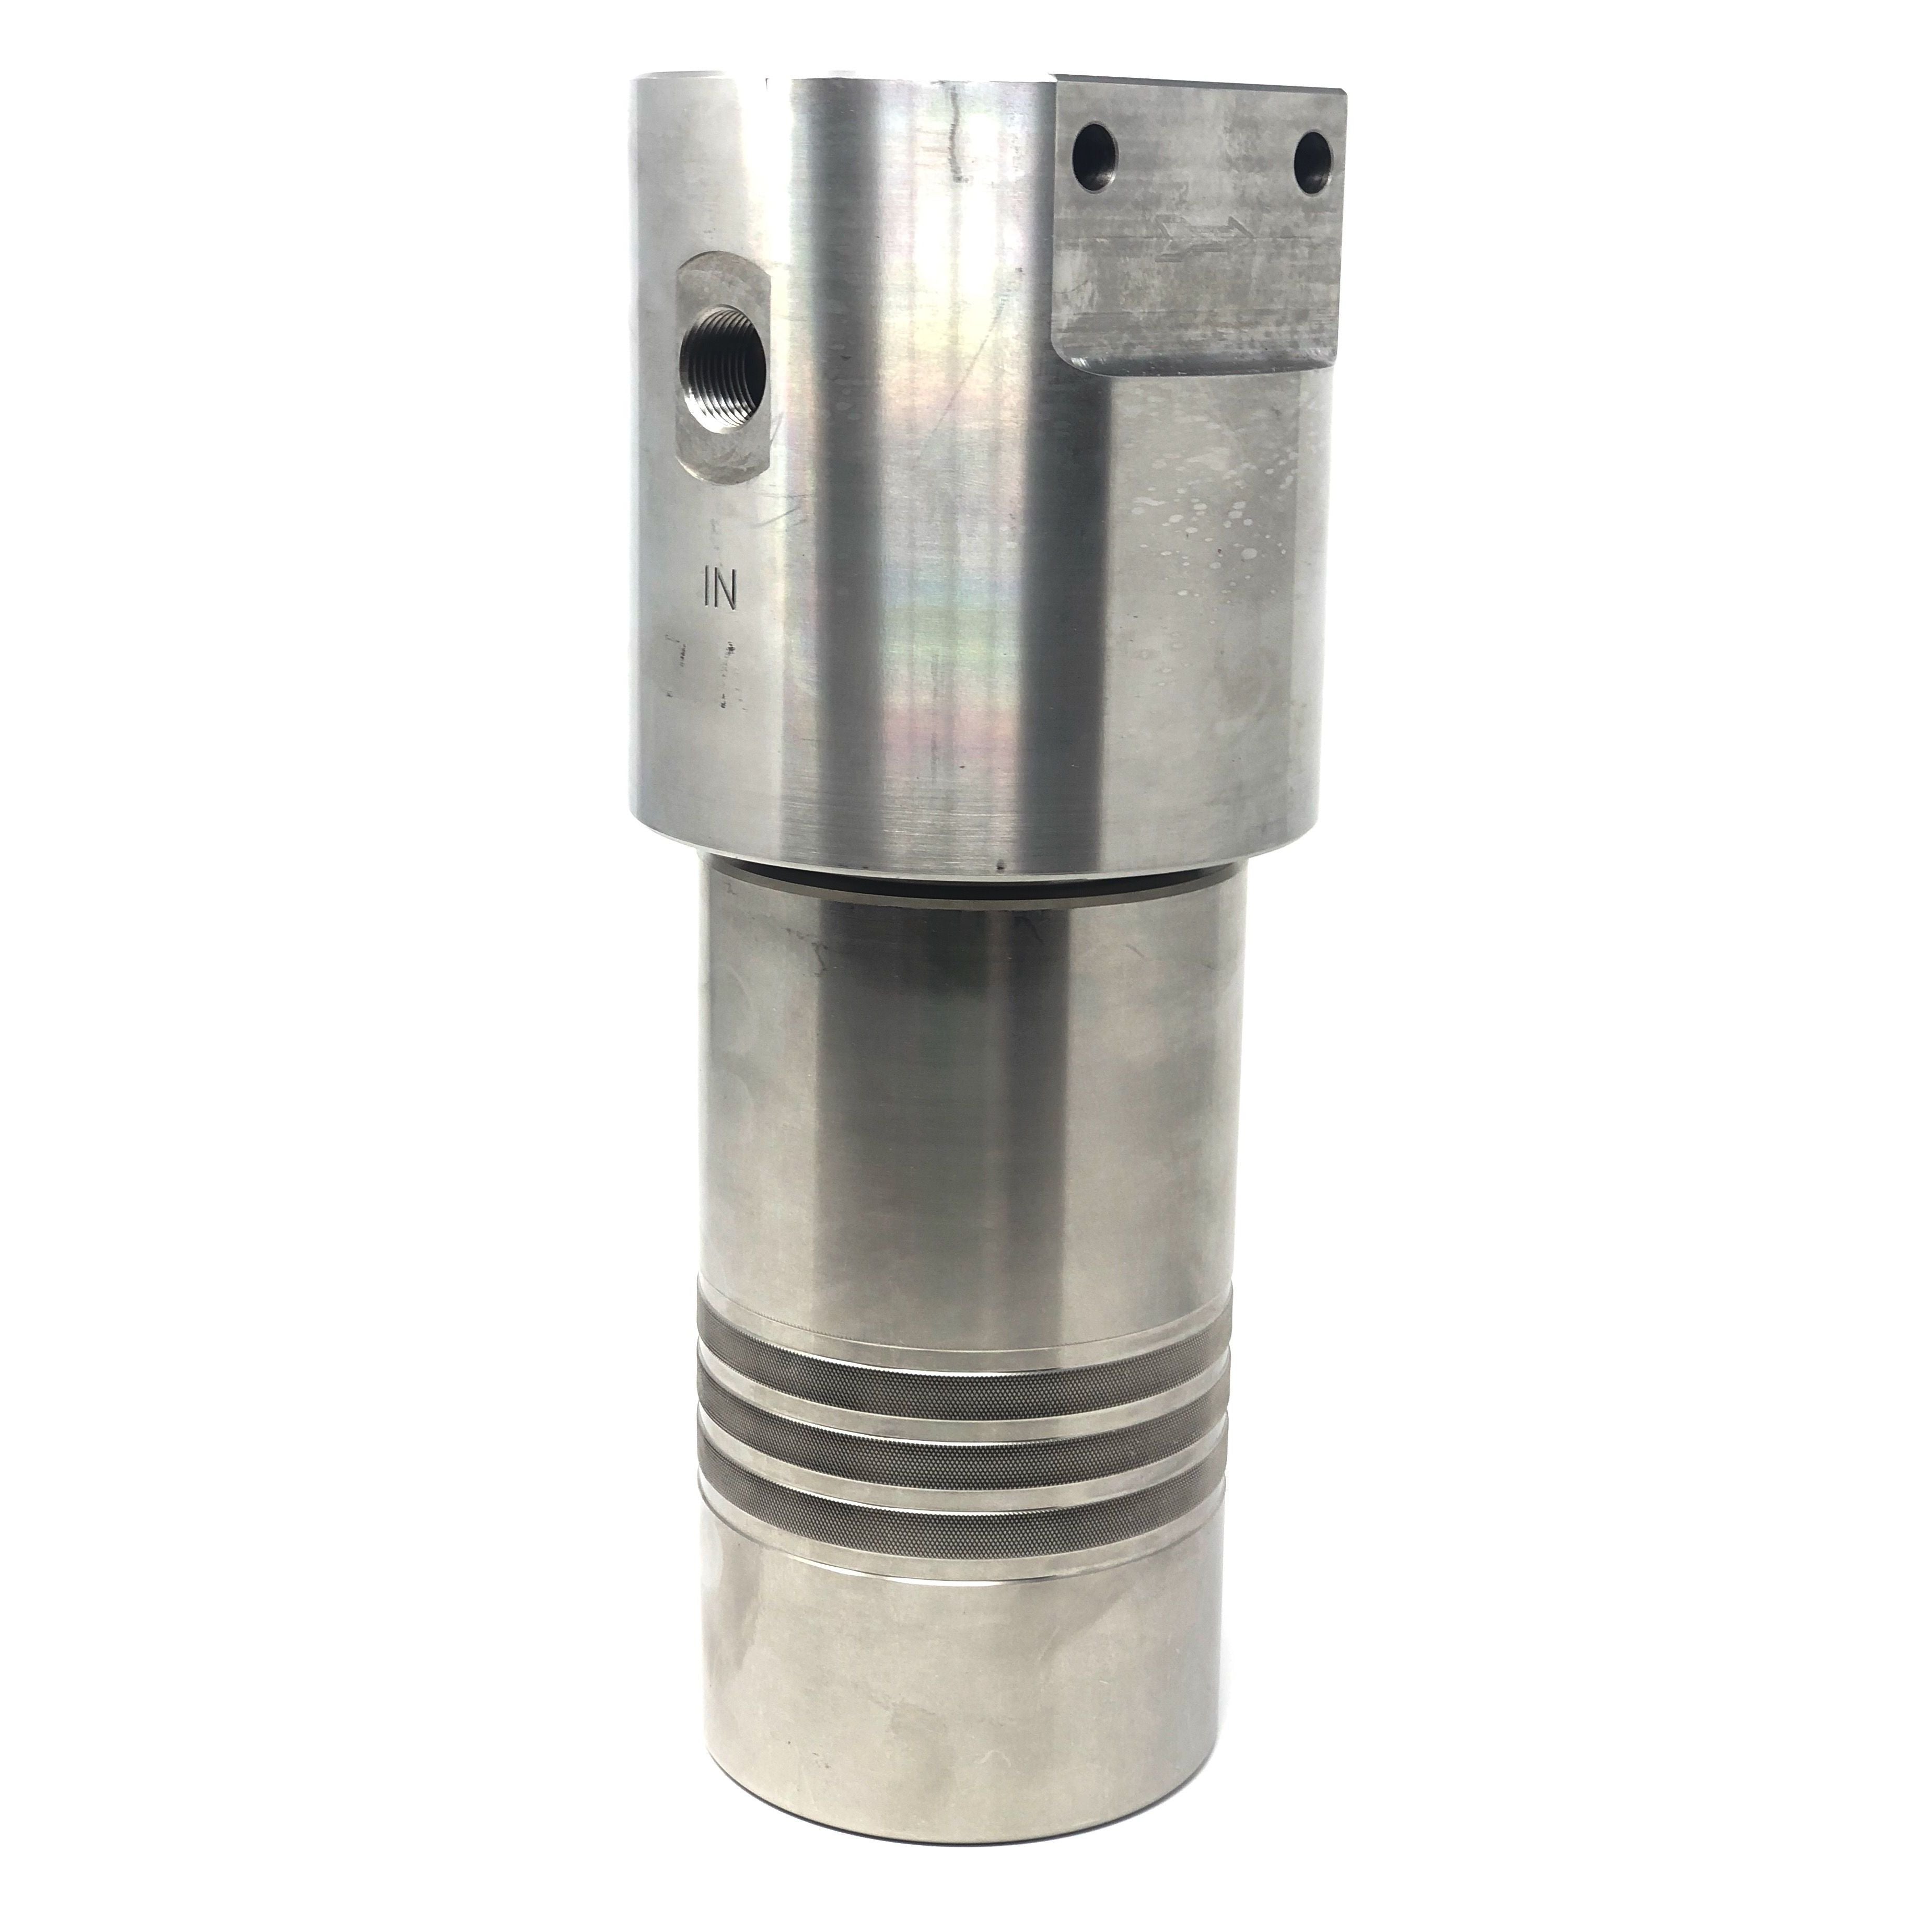 52S-248S-3MDN : Chase Ultra High Pressure Inline Filter, 10000psi, #8 SAE (1/2"), 3 Micron, With Visual Indicator, No Bypass